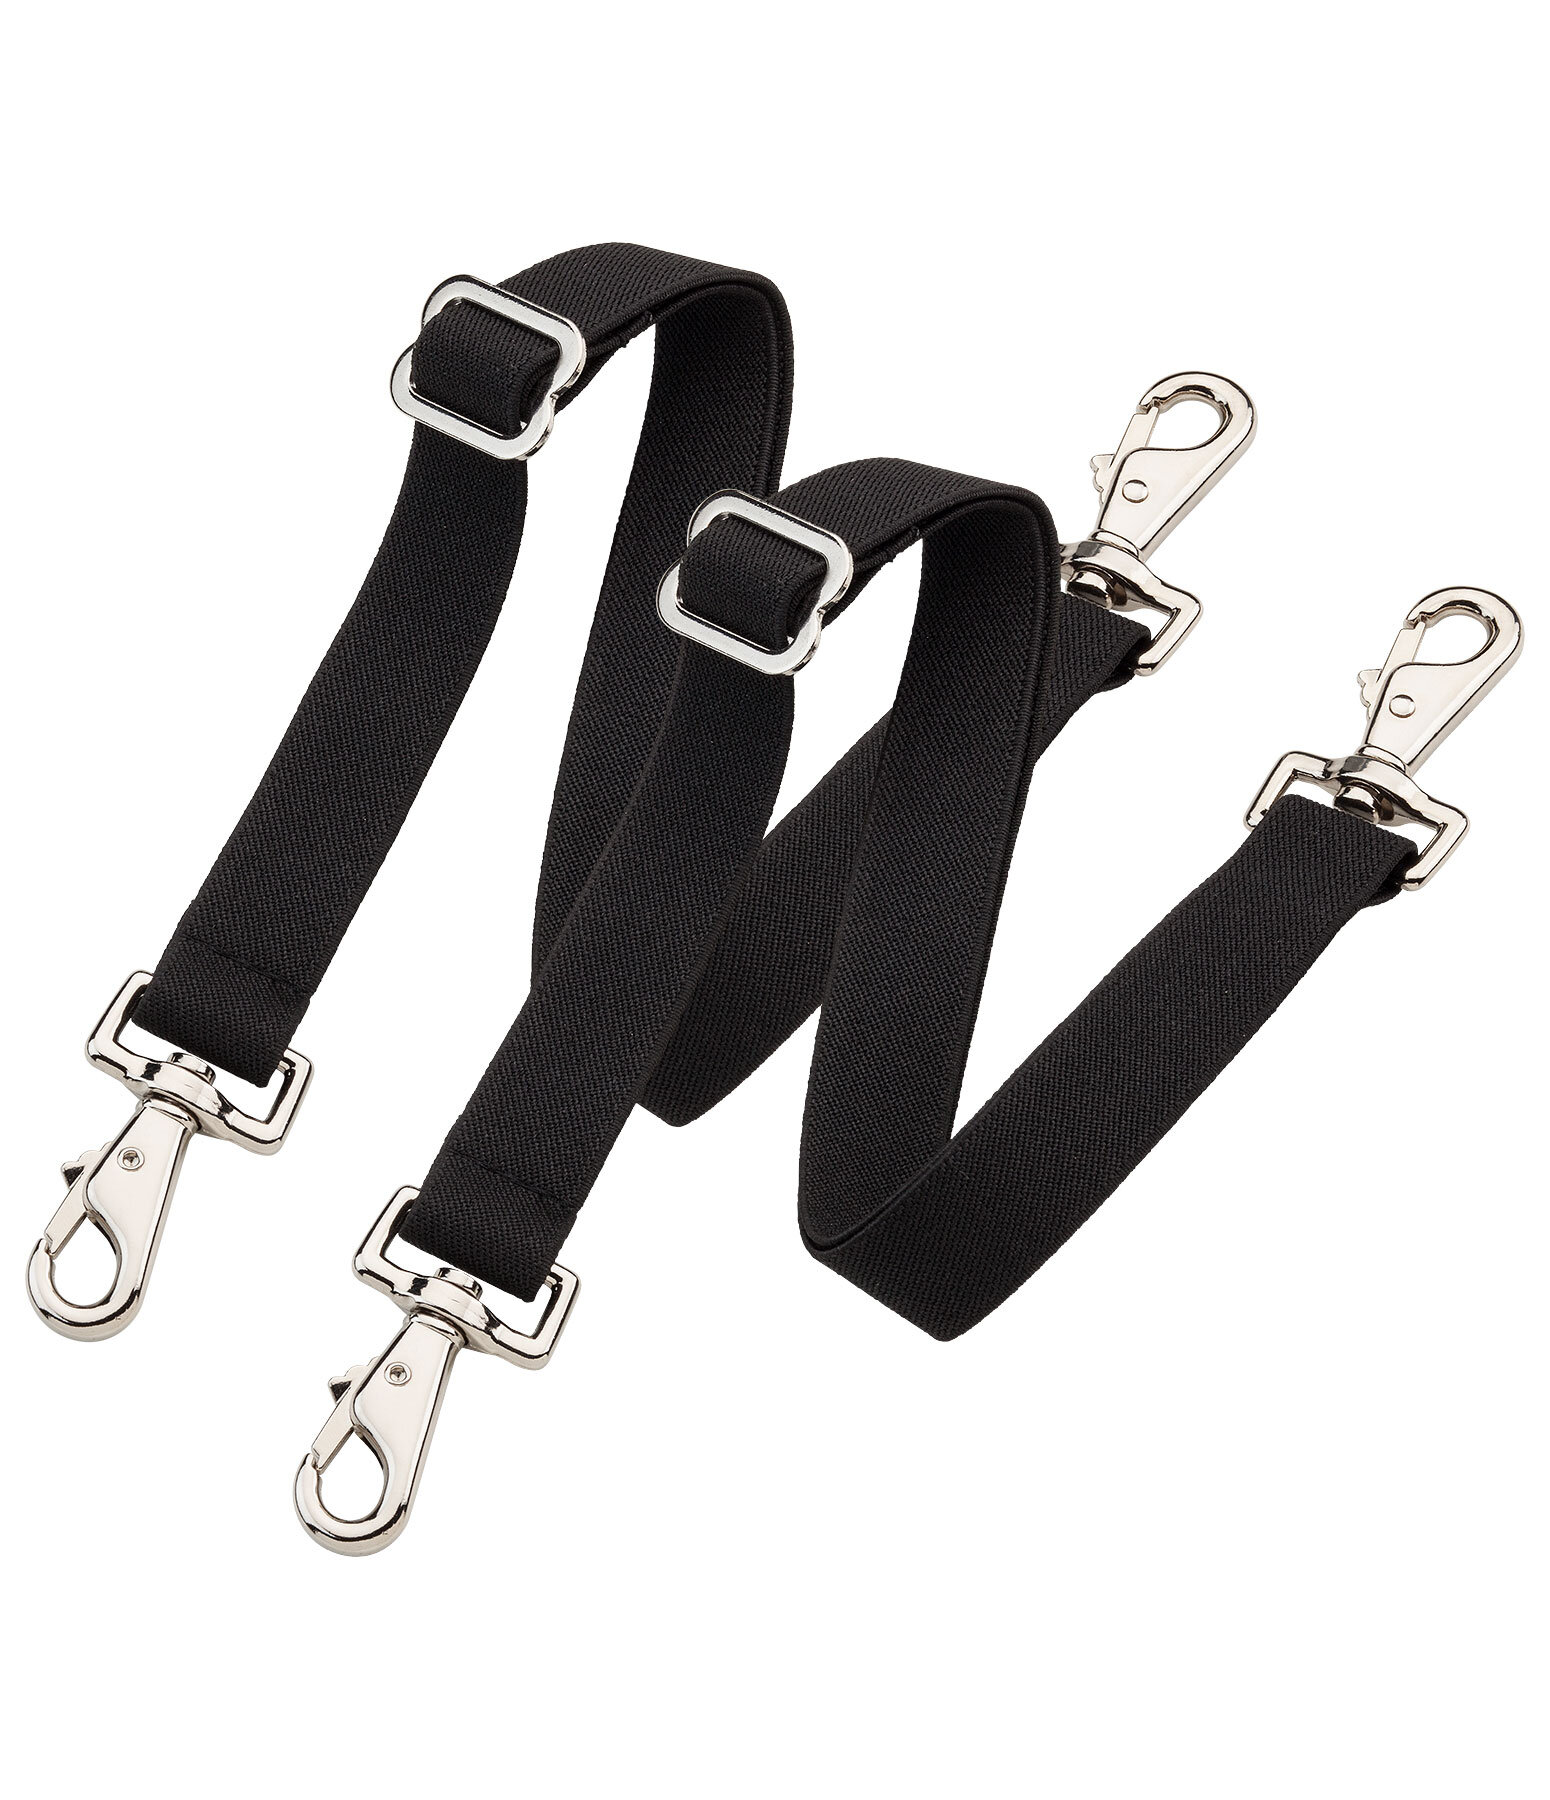 Leg Straps with Snap Hooks - Rug Accessories - Kramer Equestrian